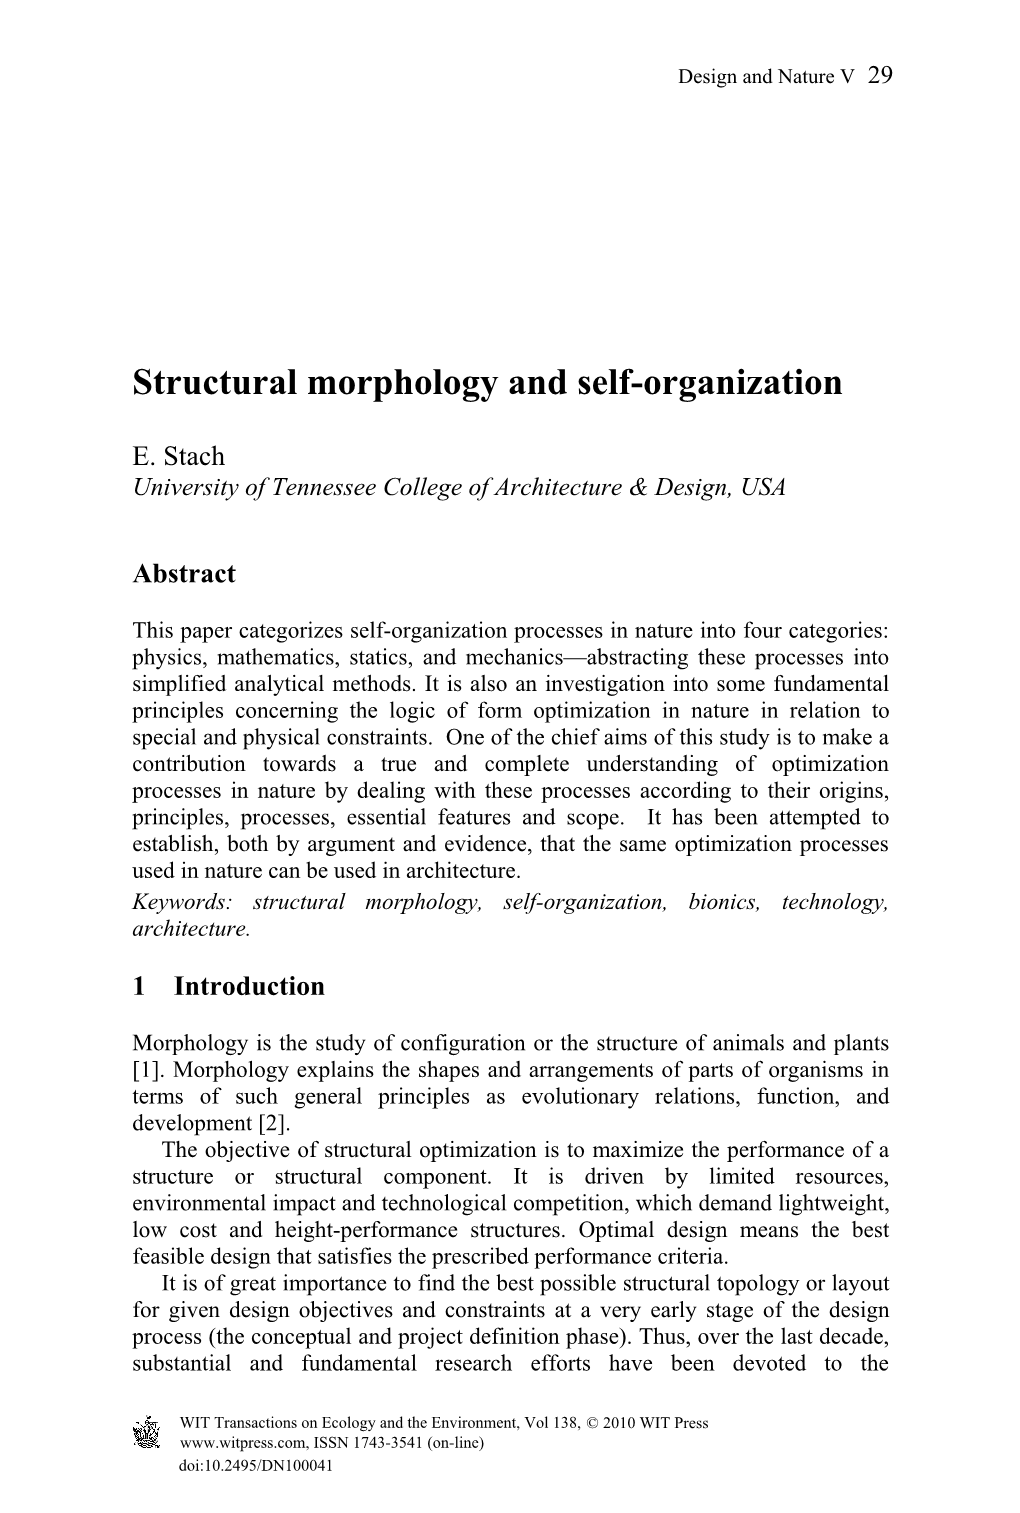 Structural Morphology and Self-Organization